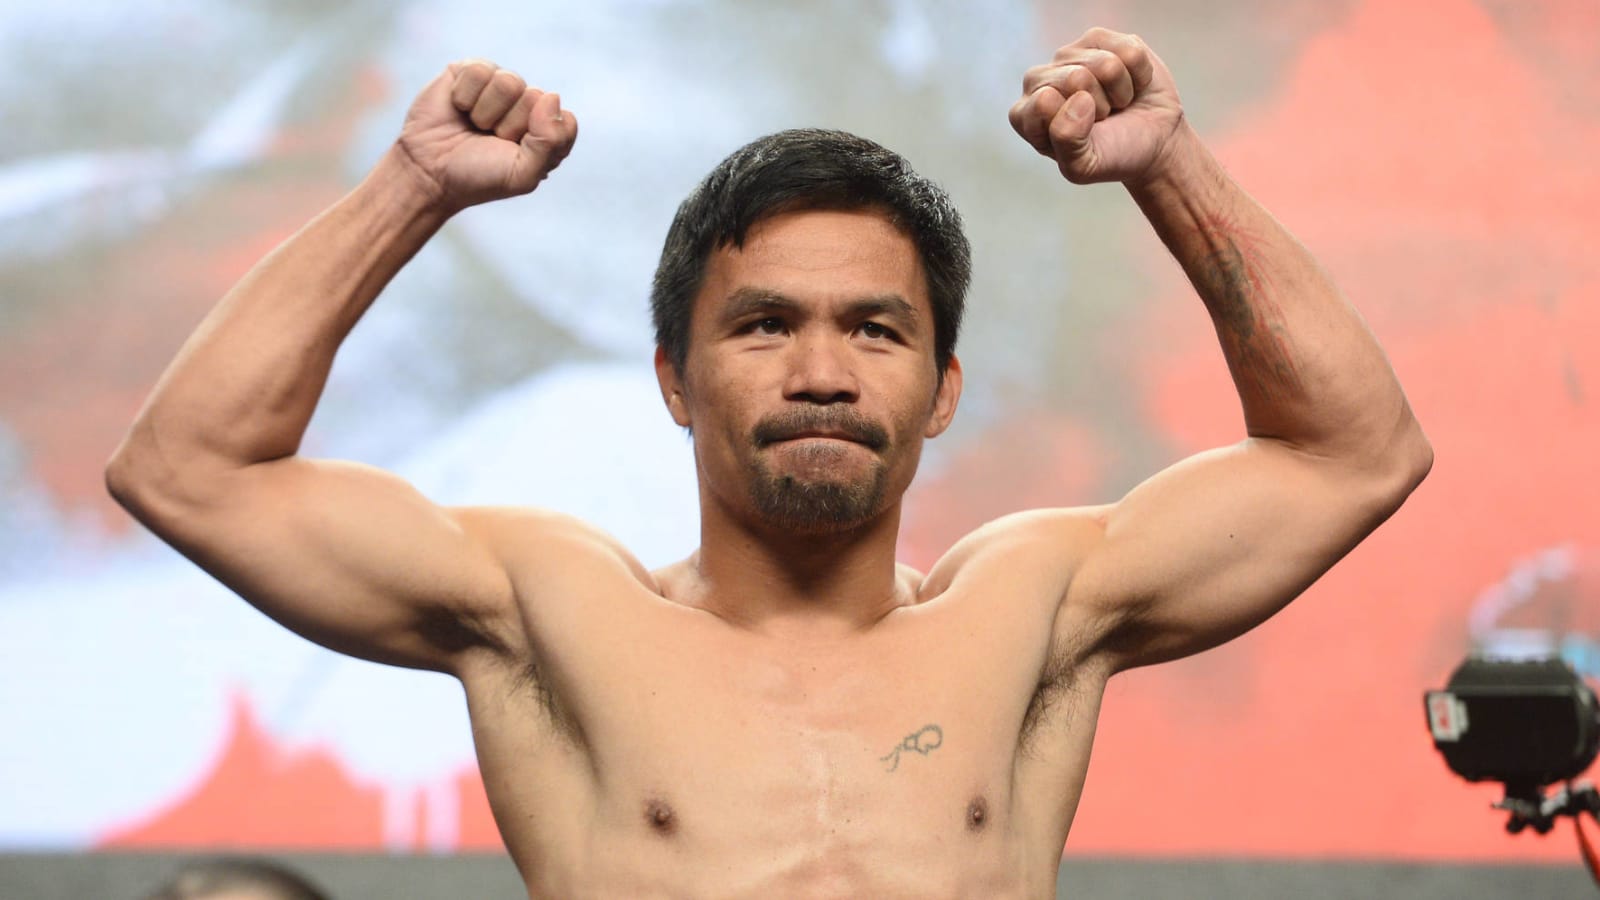 Manny Pacquiao wants to buy NBA team after boxing career ends